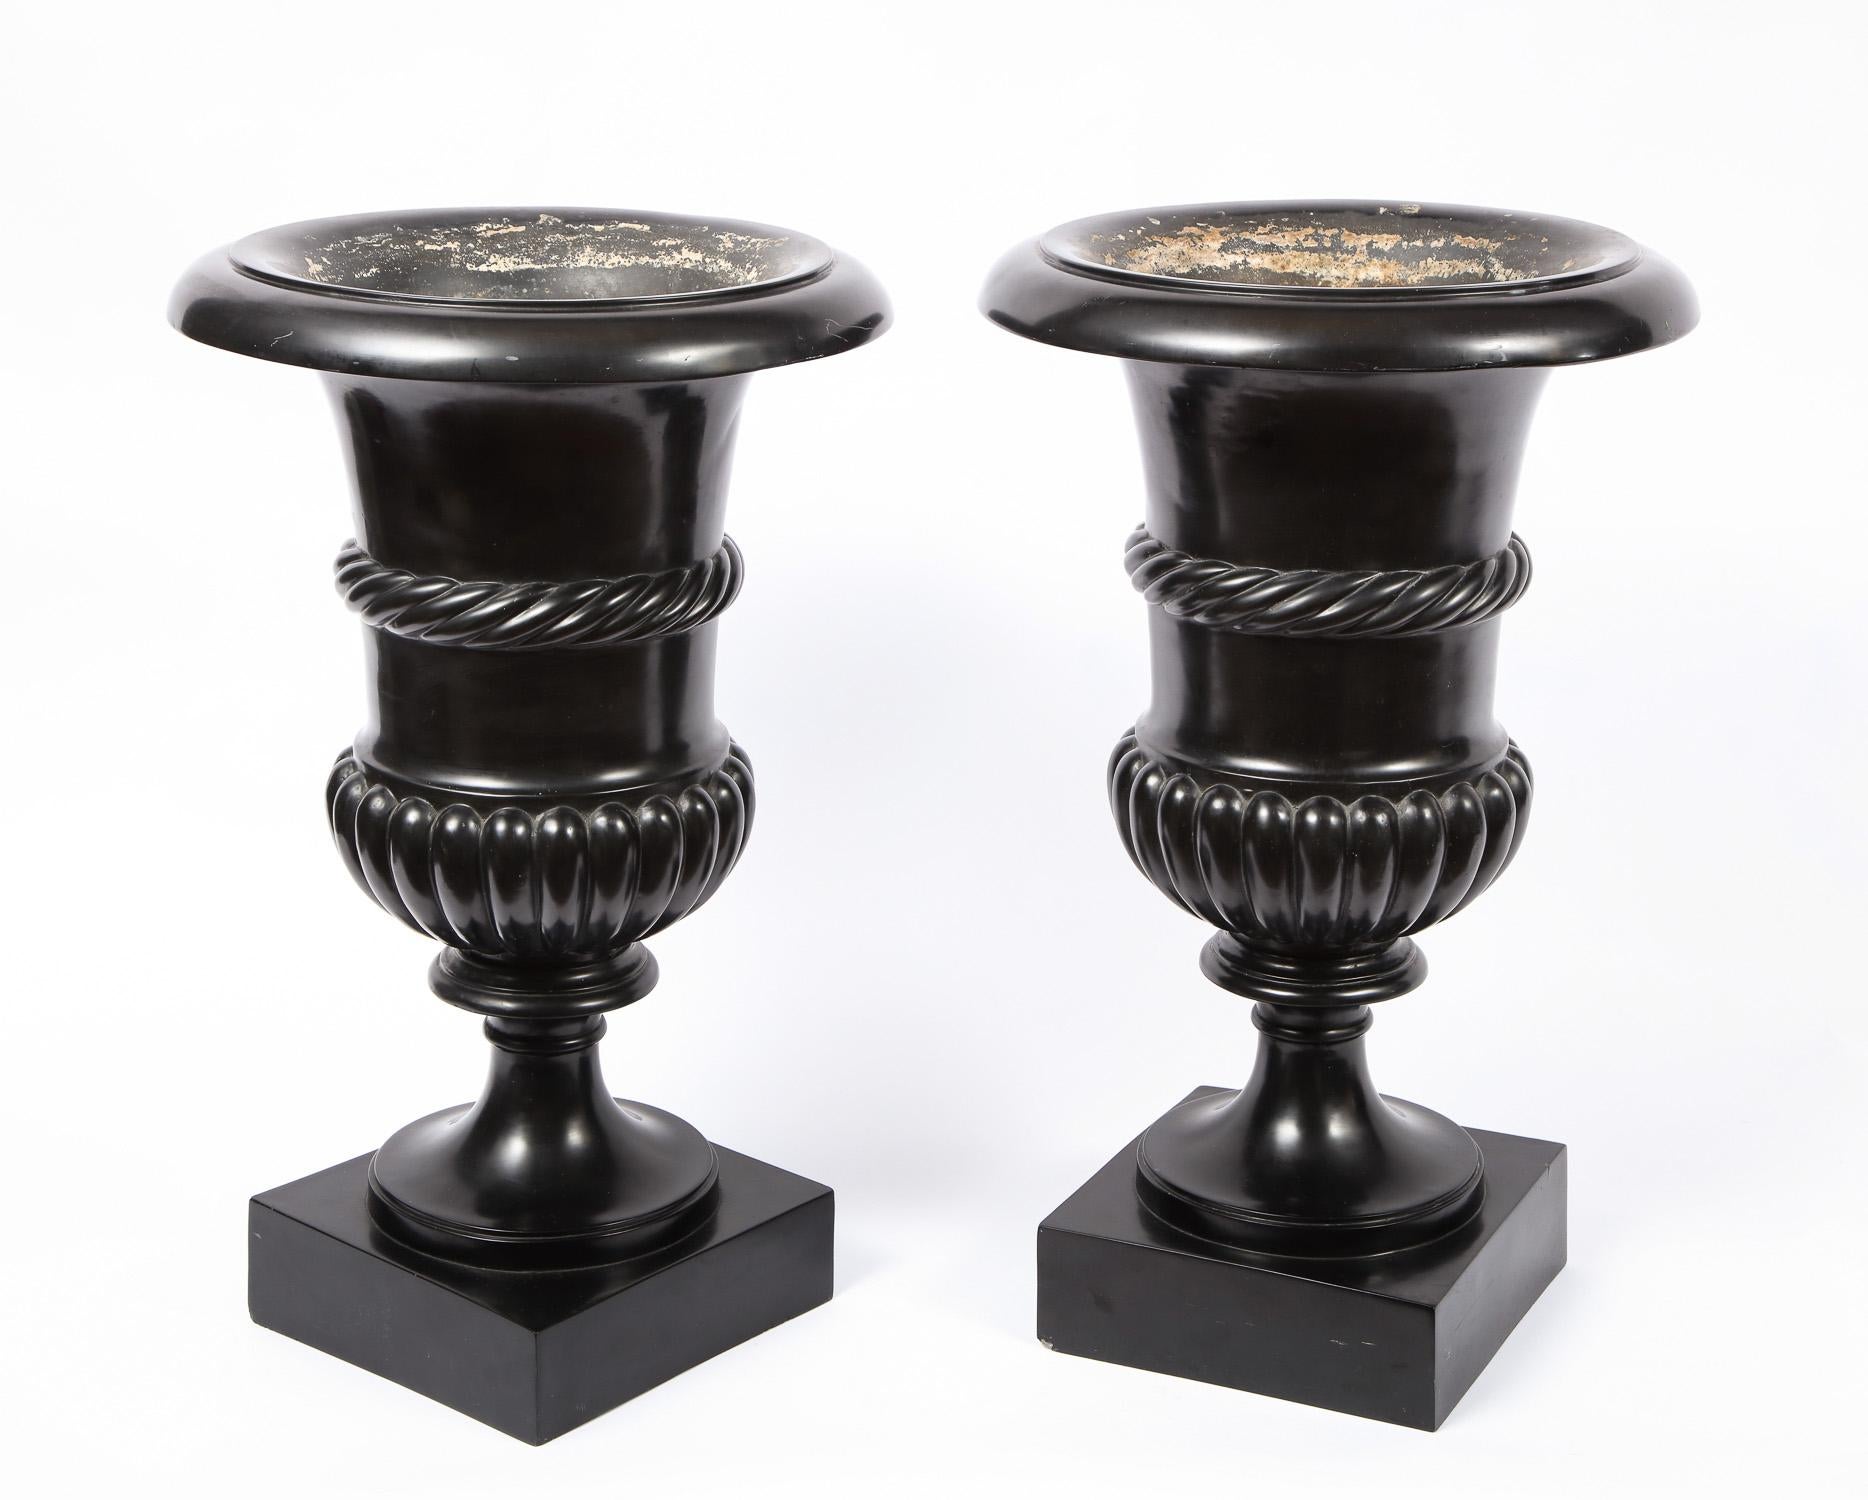 Pair of Antique Roman Neoclassical Campagna Shaped Black Scagliola Vases or Urns For Sale 2